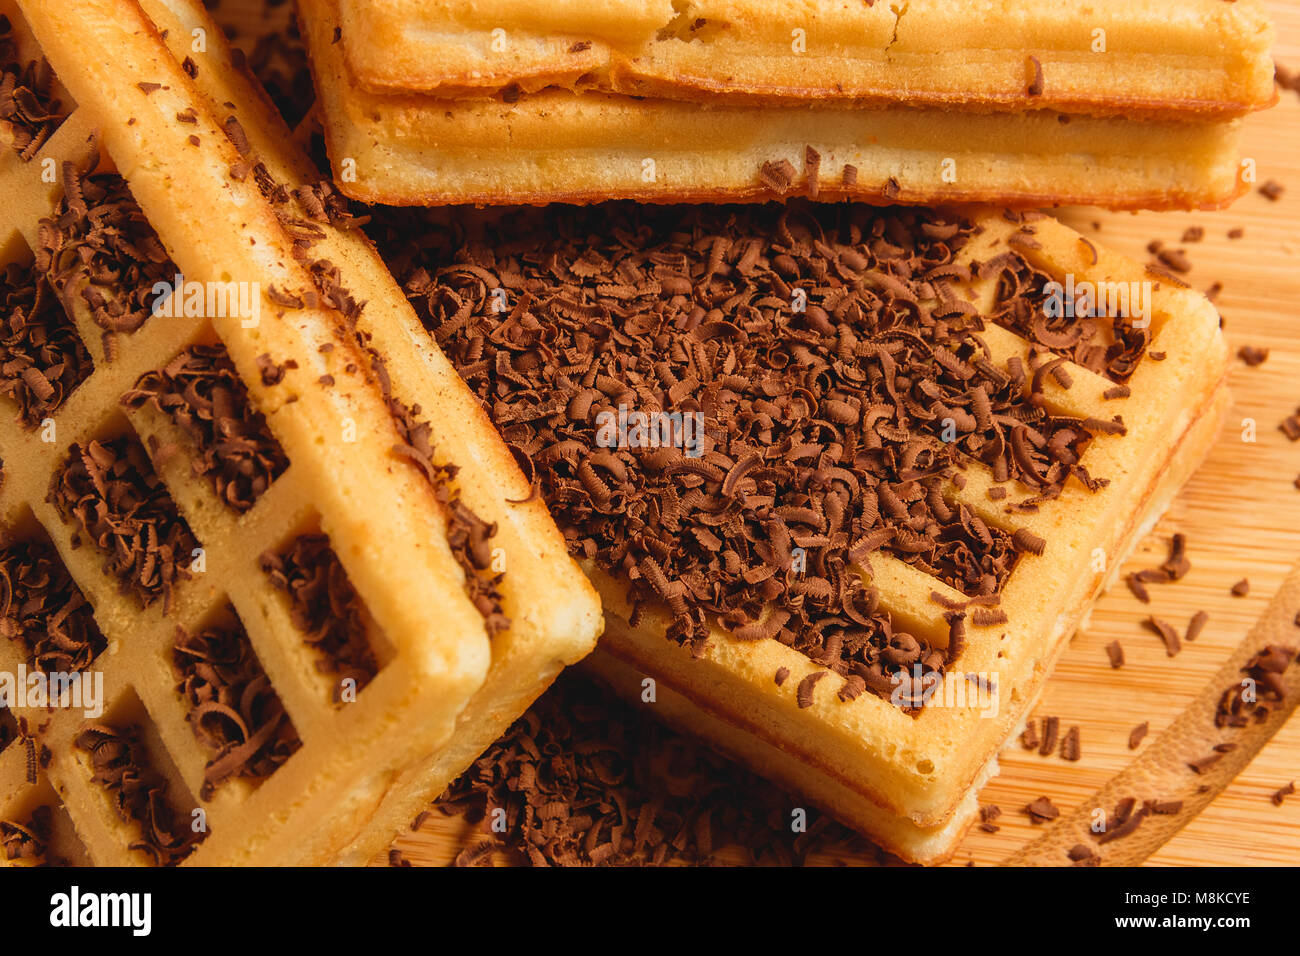 Homemade Waffles with Jam and Chocolate Shavings Background. Stock Photo